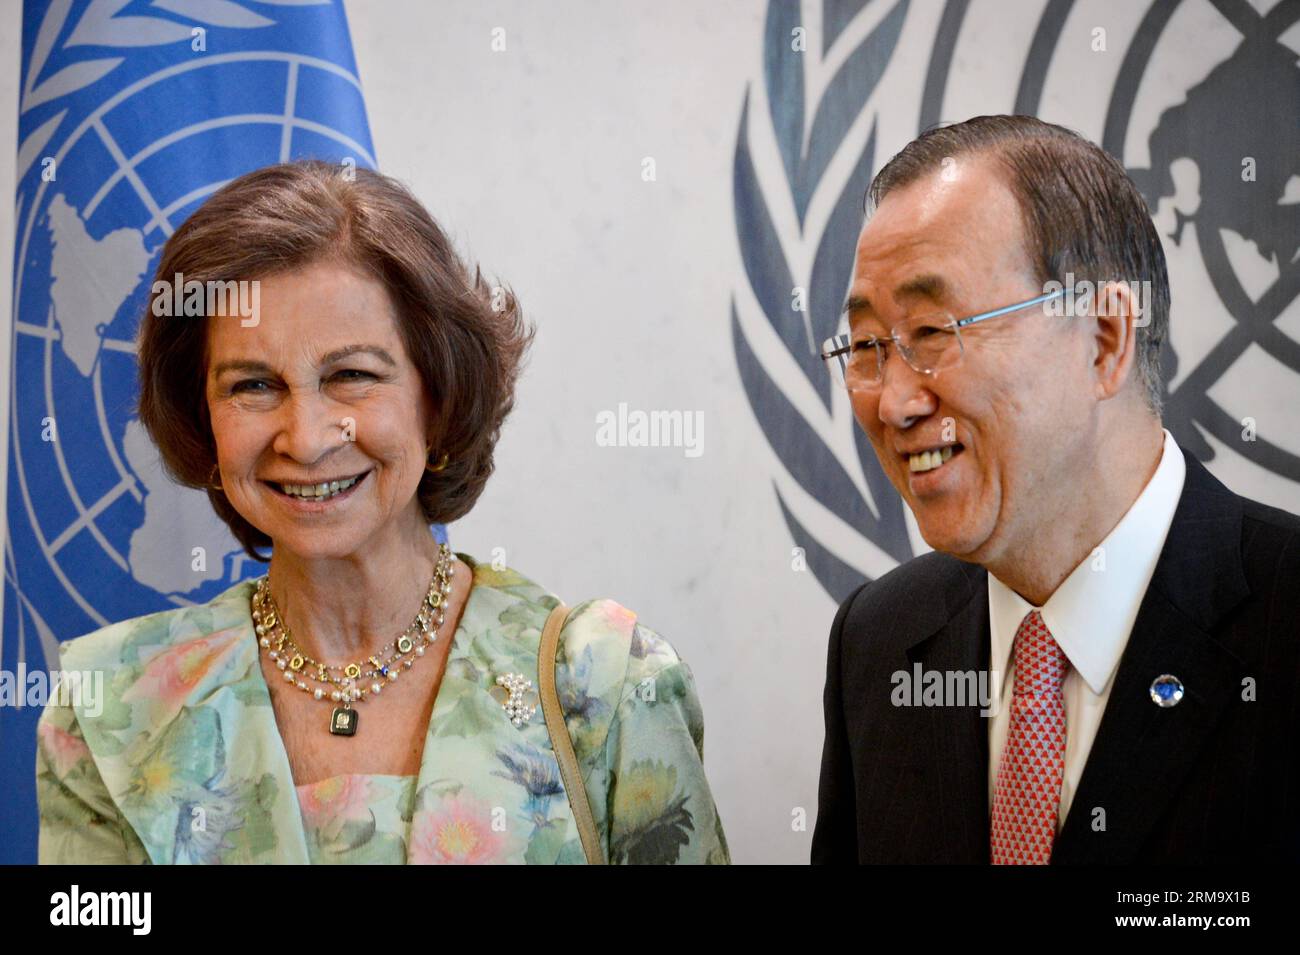 (140603) -- NEW YORK, June 3, 2014 (Xinhua) -- United Nations Secretary-General Ban Ki-moon (R) poses for photos with Queen Sofia of Spain prior to their meeting at the UN headquarters in New York, on June 3, 2014, a day after King Juan Carlos of Spain announced his abdication in favor of his son, the 46-year-old Crown Prince Felipe. (Xinhua/Niu Xiaolei) UN-NEW YORK-SPAIN-QUEEN-VISIT PUBLICATIONxNOTxINxCHN   140603 New York June 3 2014 XINHUA United Nations Secretary General Ban KI Moon r Poses for Photos With Queen Sofia of Spain Prior to their Meeting AT The UN Headquarters in New York ON Ju Stock Photo